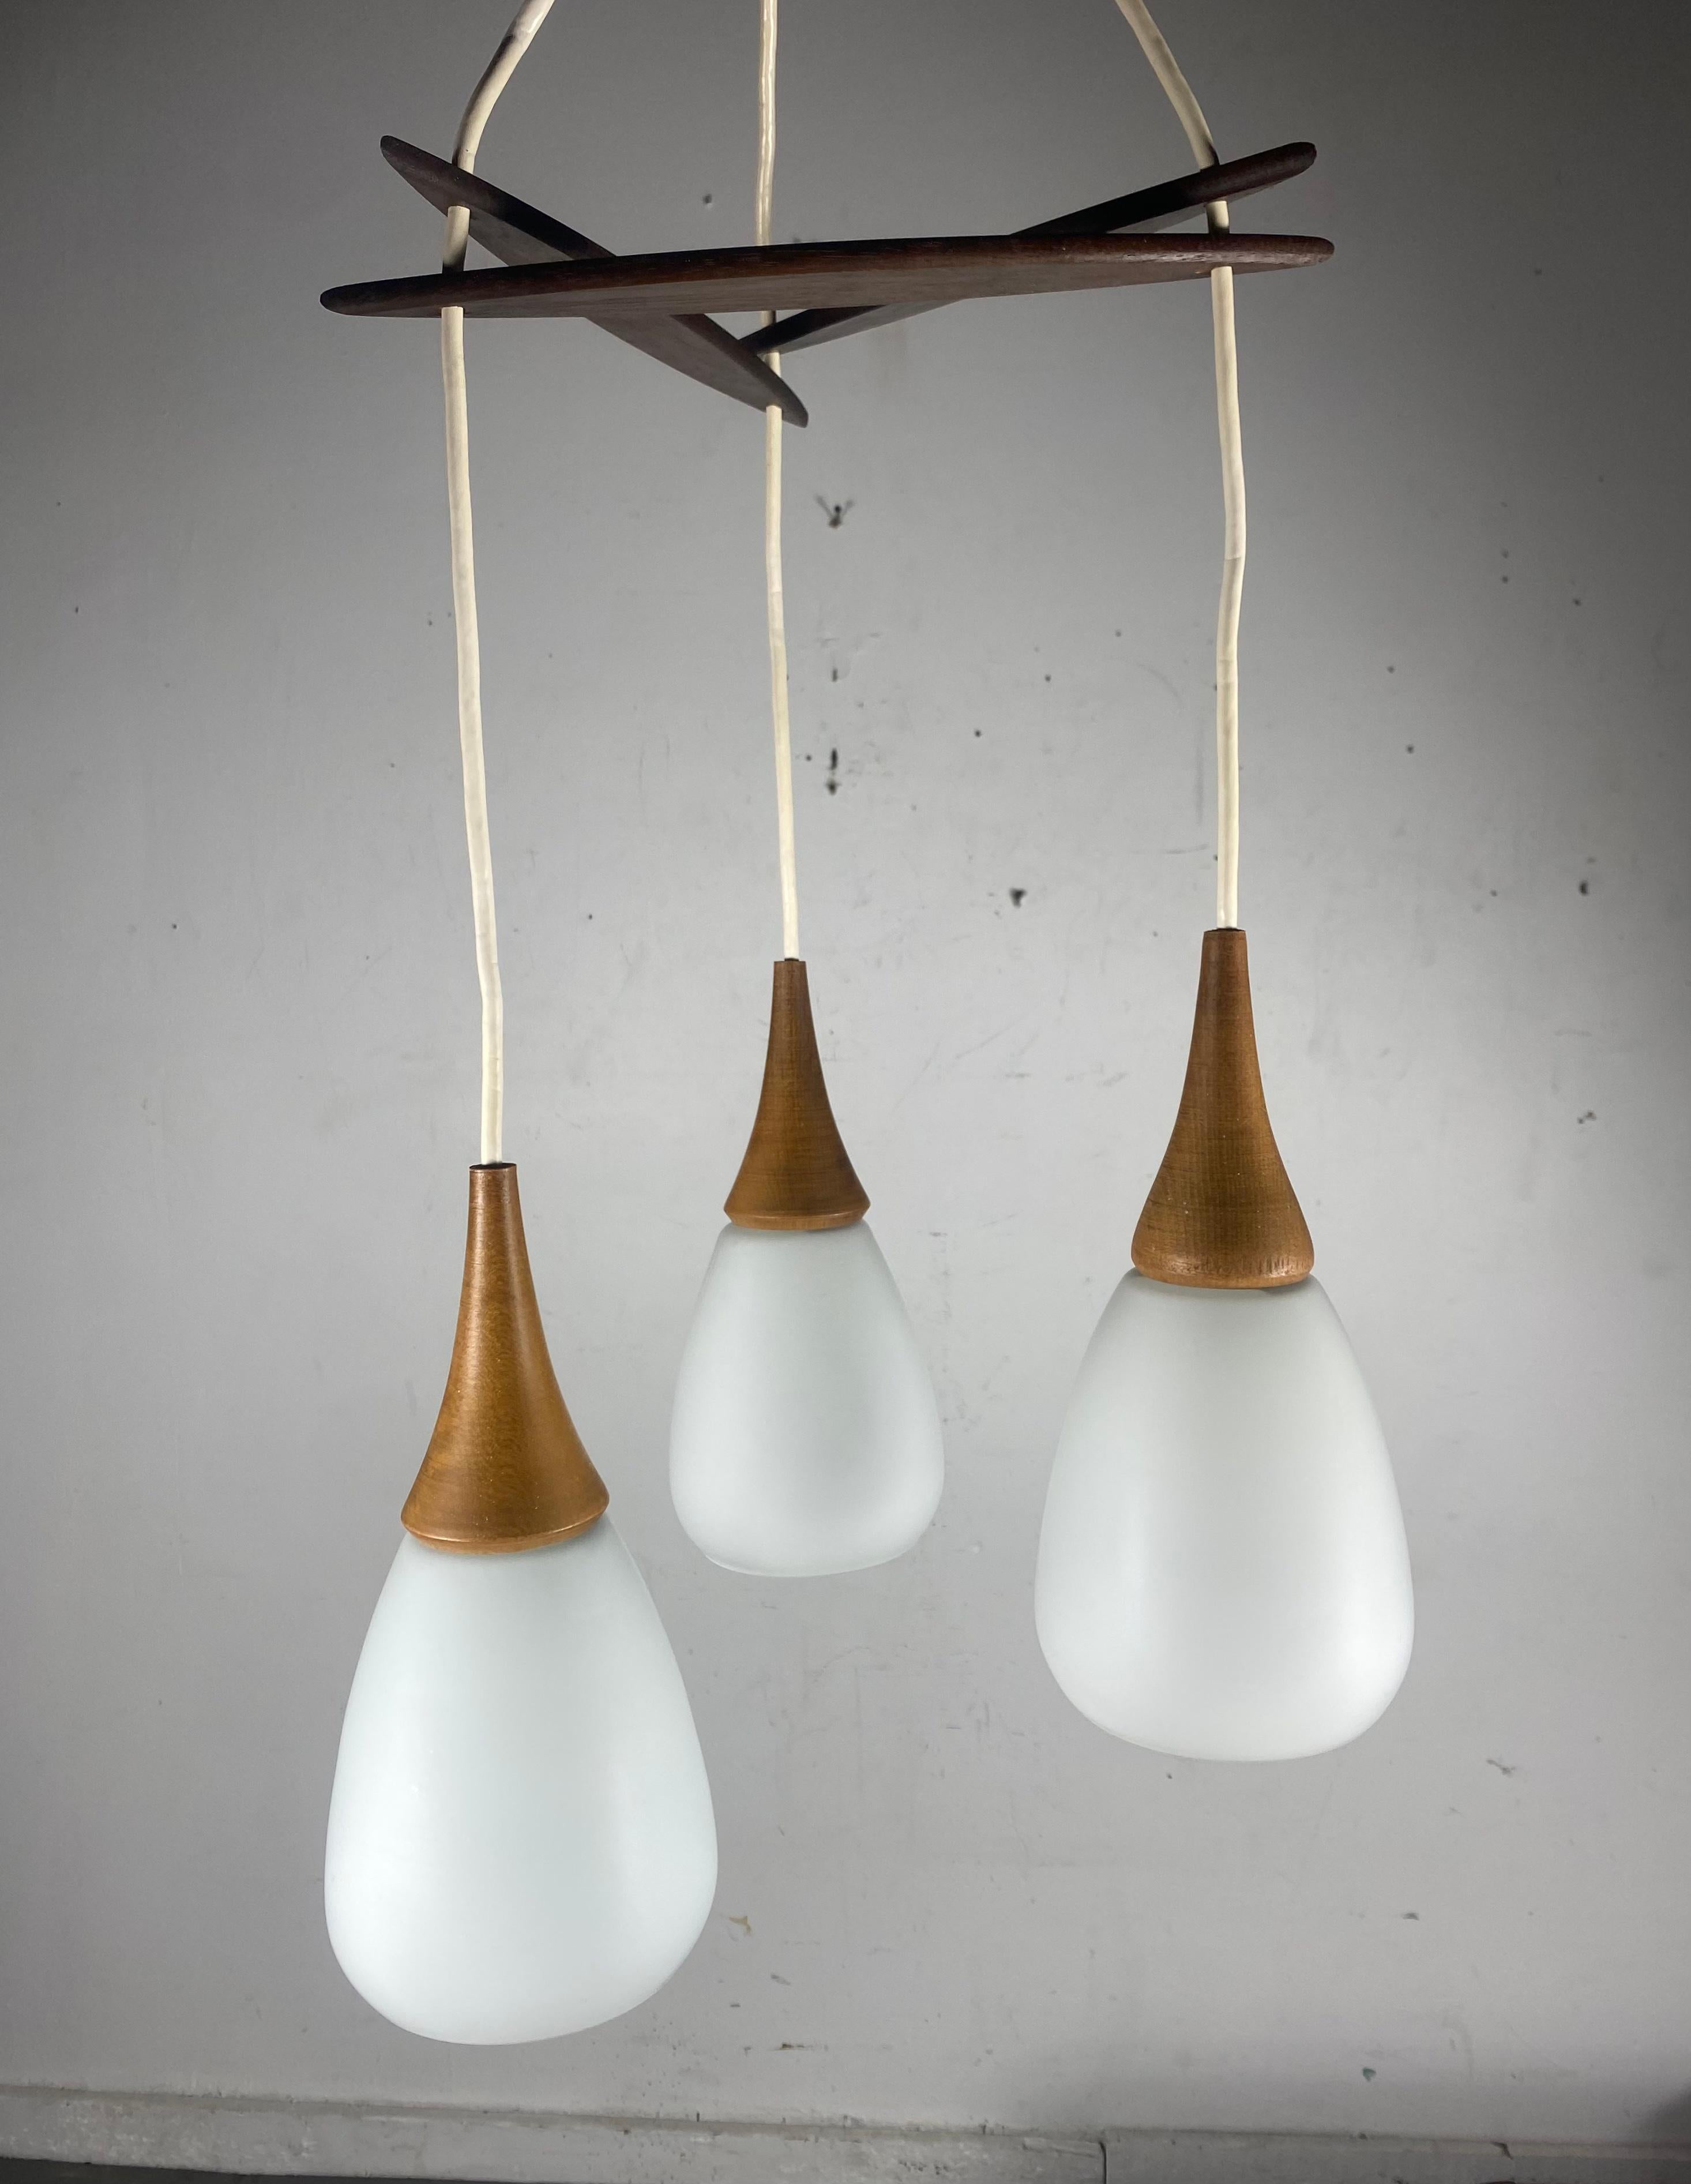 Triple tear drop pendant light. Danish design, circa 1955.
Opaline glass globes from Holmegaard with teak tops hung from an adjustable r three pronged rosewood canopy.